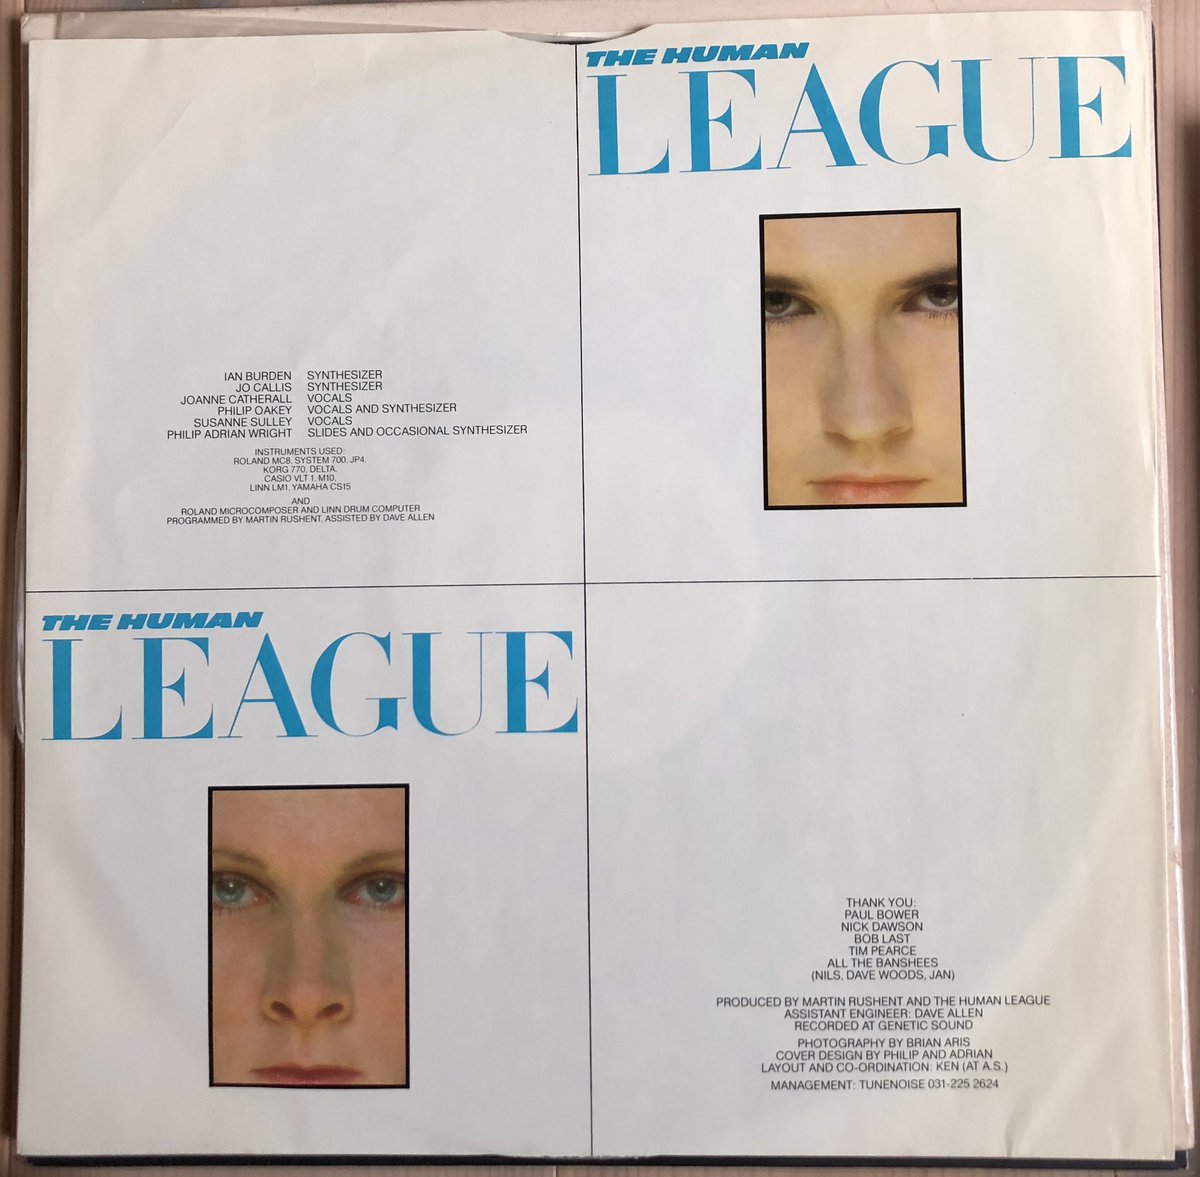 The Human League – Dare!
Virgin 1981

UKオリジナル、ピクチャーディスクなど何枚もあるのに買ってしまう。好きなんですよねーこのジャケとサウンド。

Sleeve design by Ken Ansell
at The Design Clinic

#sleevedesign 

Ken’s works are also famous forDAF,XTC,Japan. It’s Great, really!